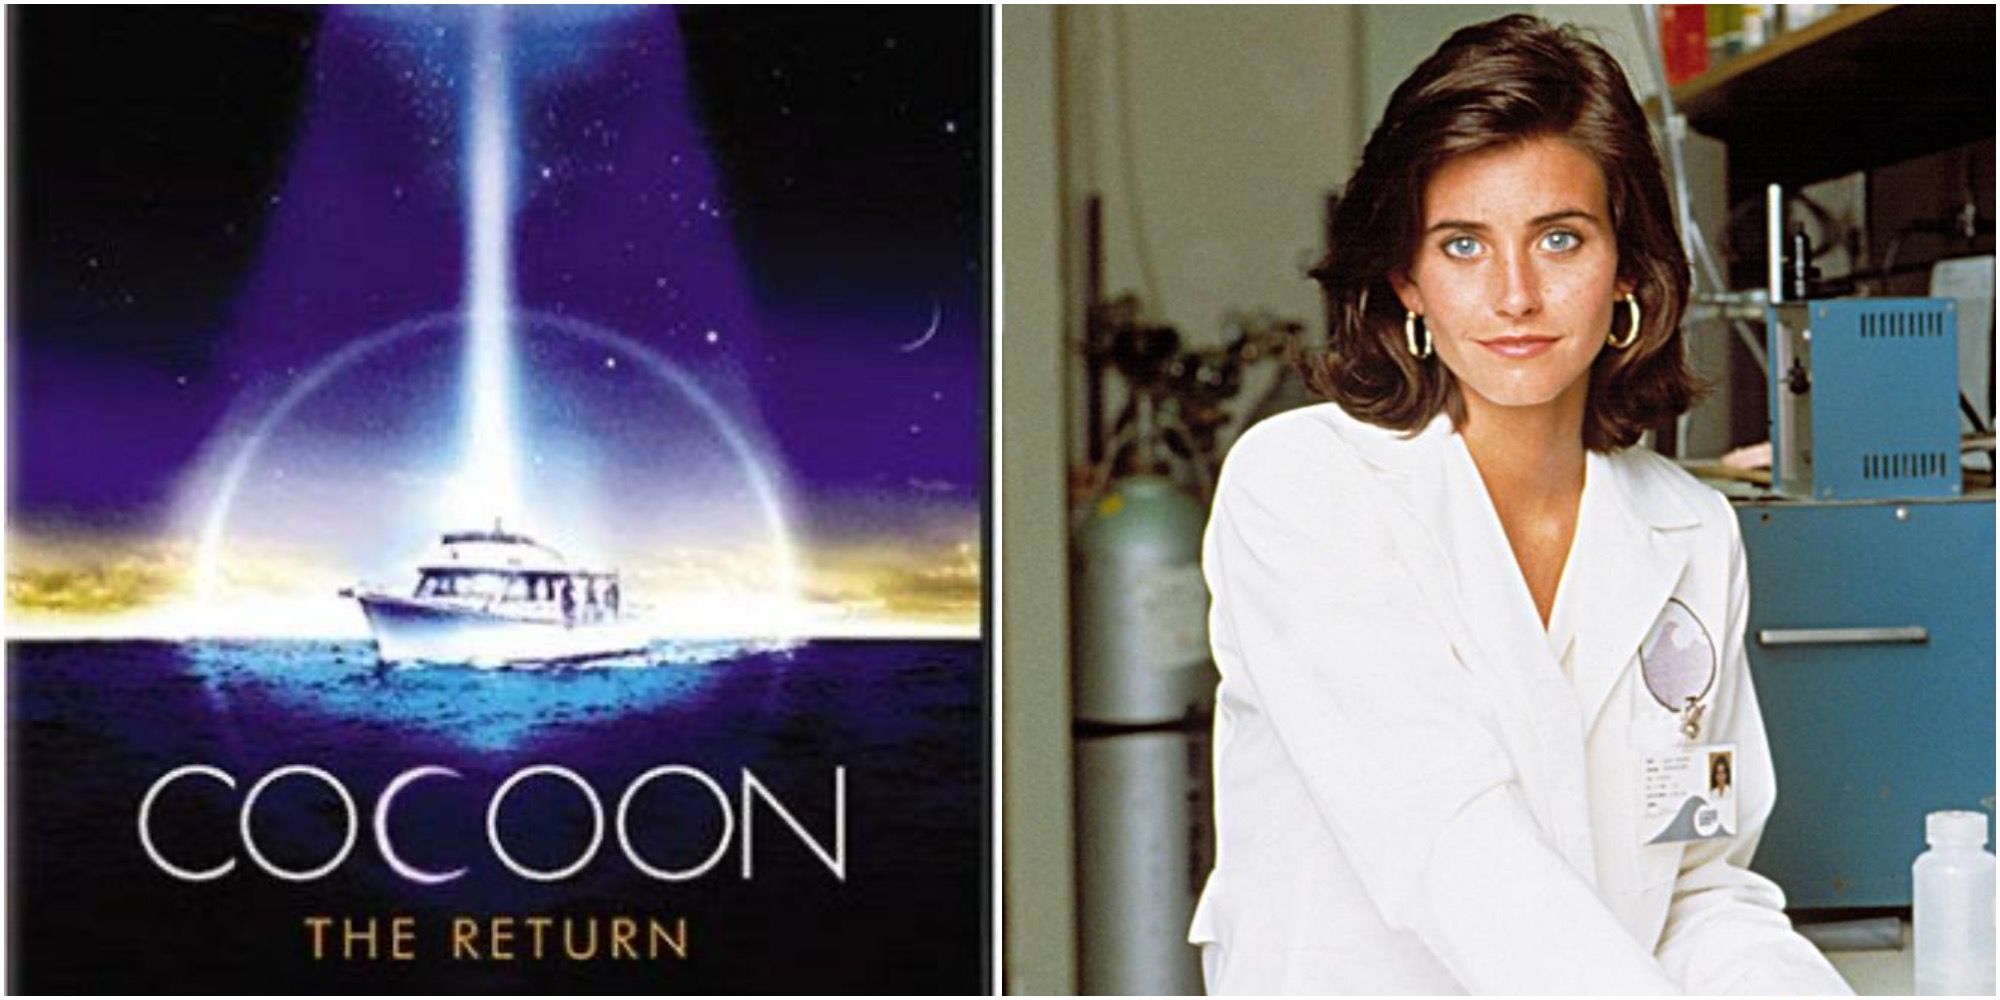 Collage Of Courteney Cox Movies Cocoon The Return